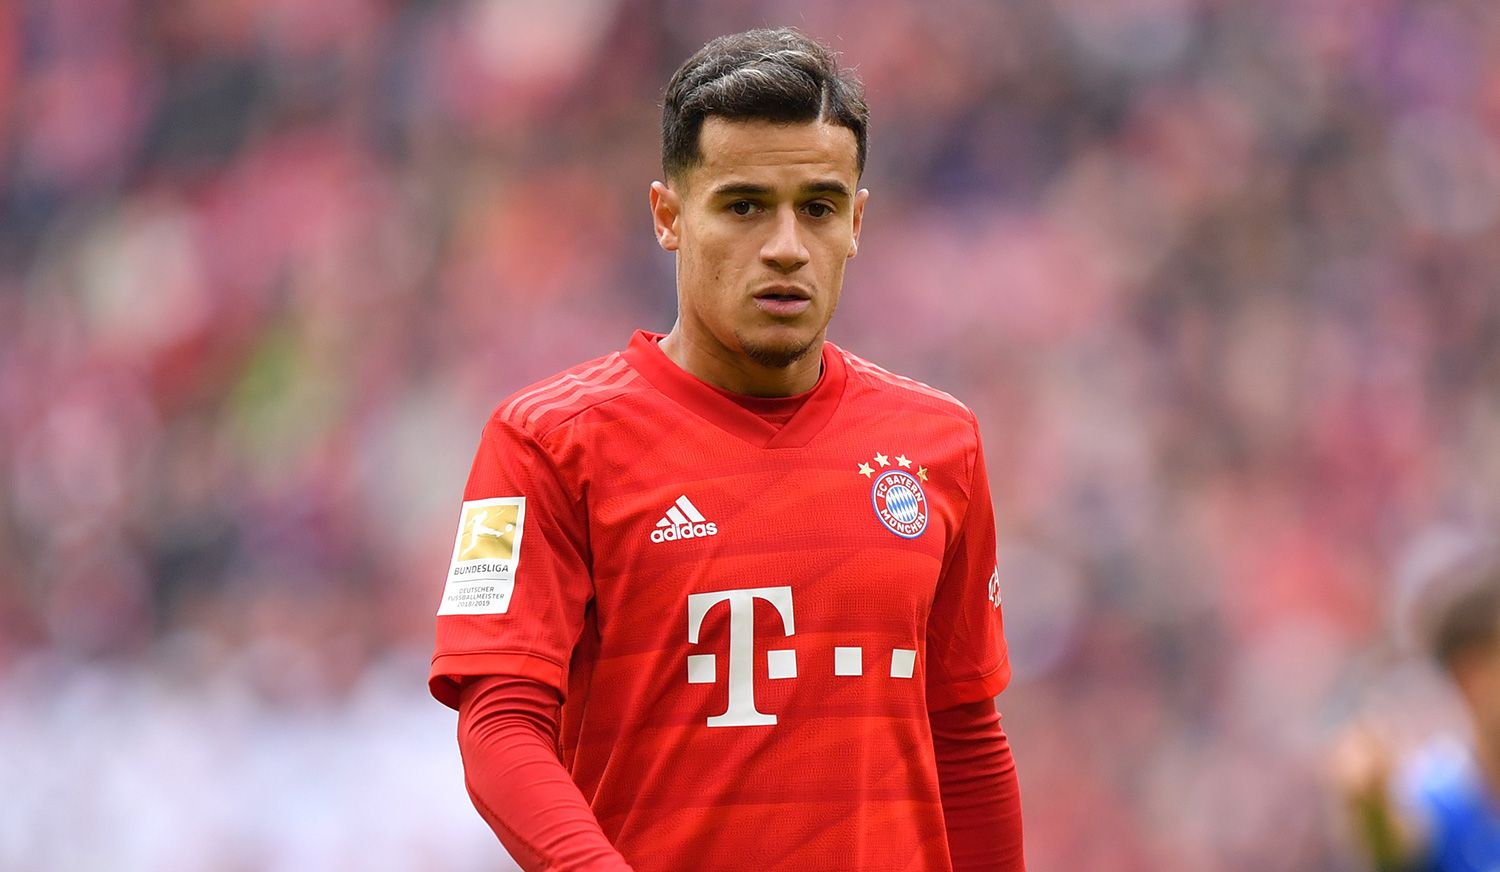 Criticisms in Germany of Coutinho's performance with Bayern